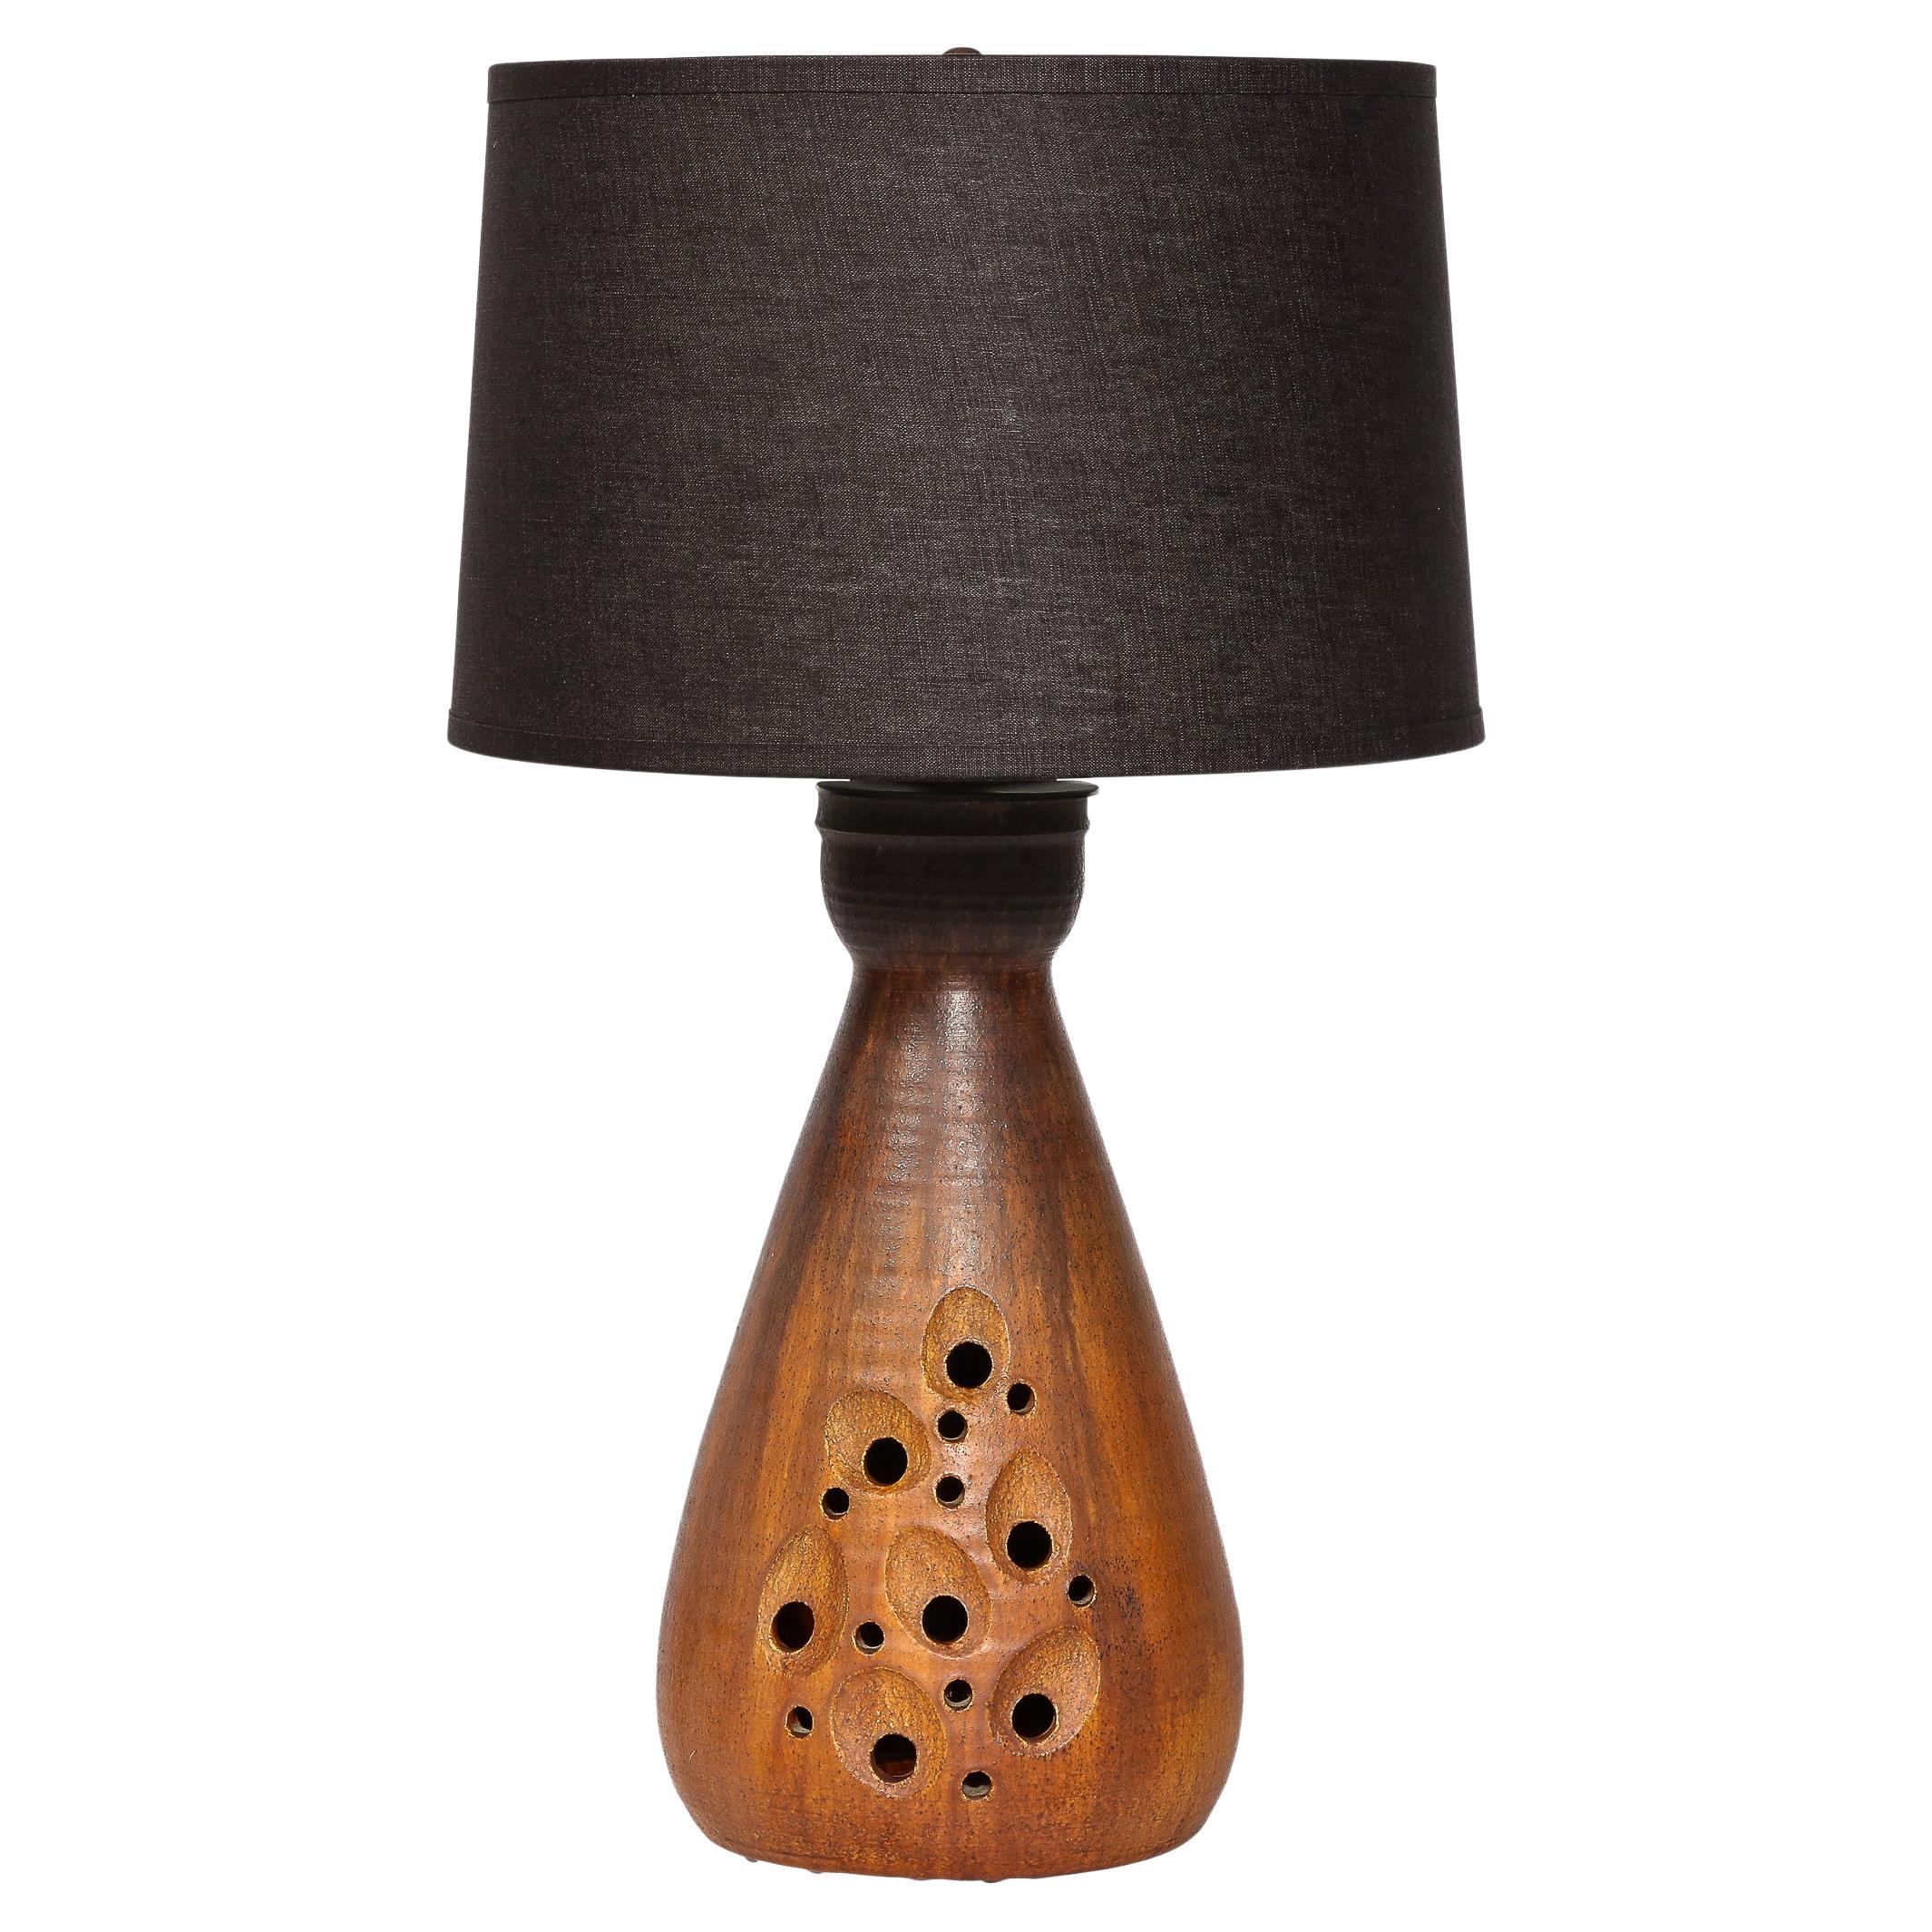 Mid-Century Modernist Ceramic Table Lamp in Slate and Red Iron Oxide Glaze For Sale